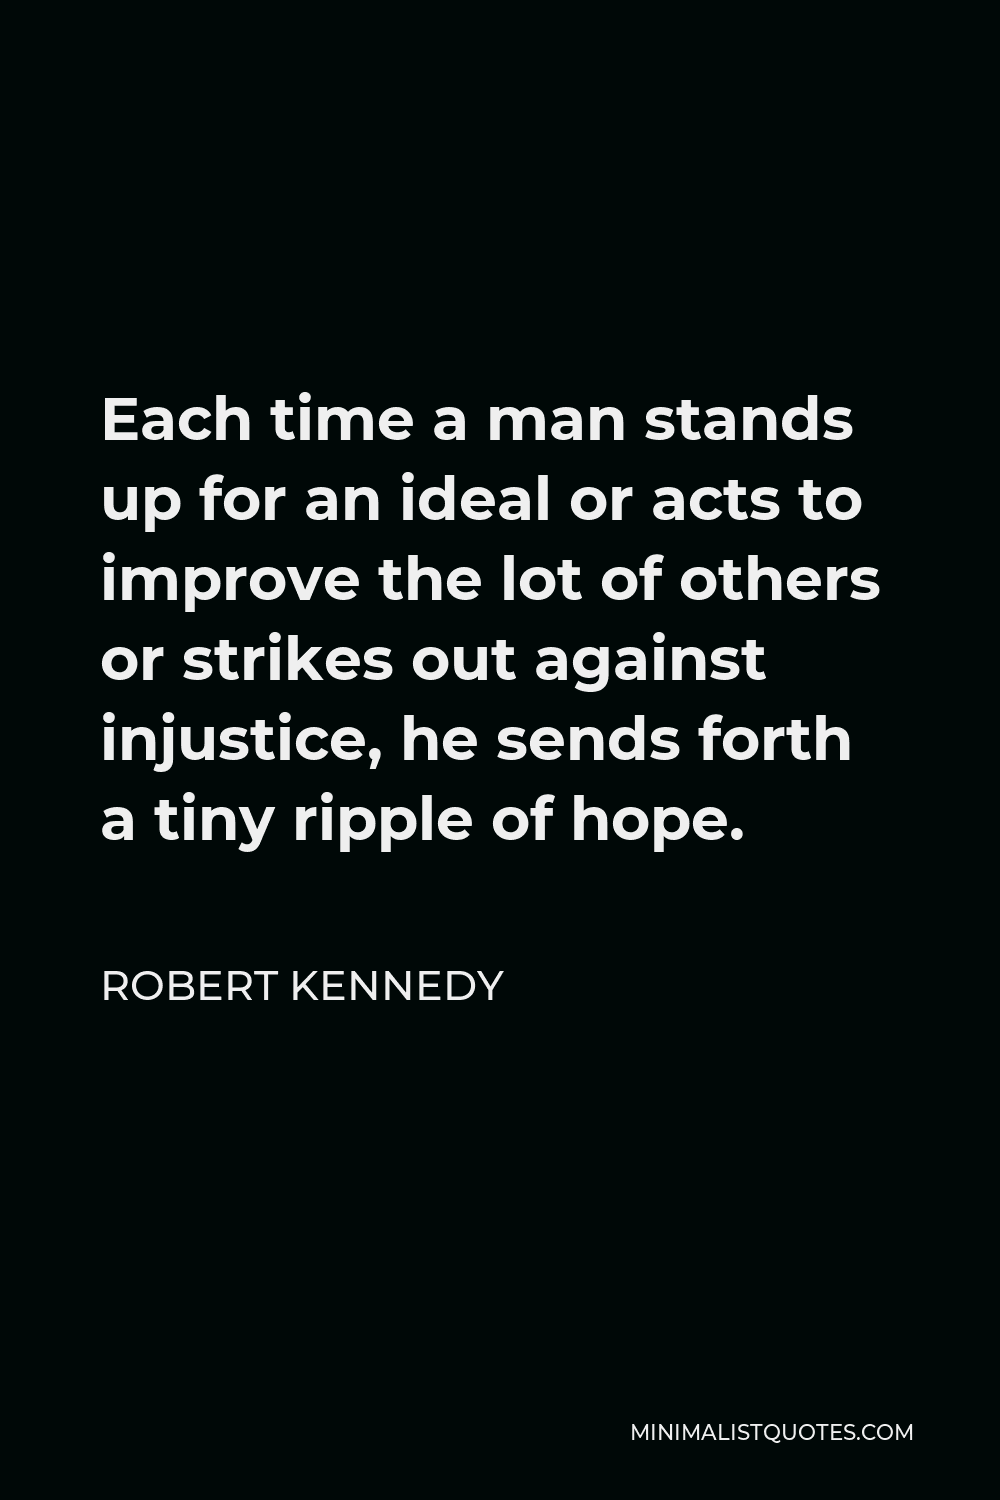 Robert Kennedy Quote - Each time a man stands up for an ideal or acts to improve the lot of others or strikes out against injustice, he sends forth a tiny ripple of hope.